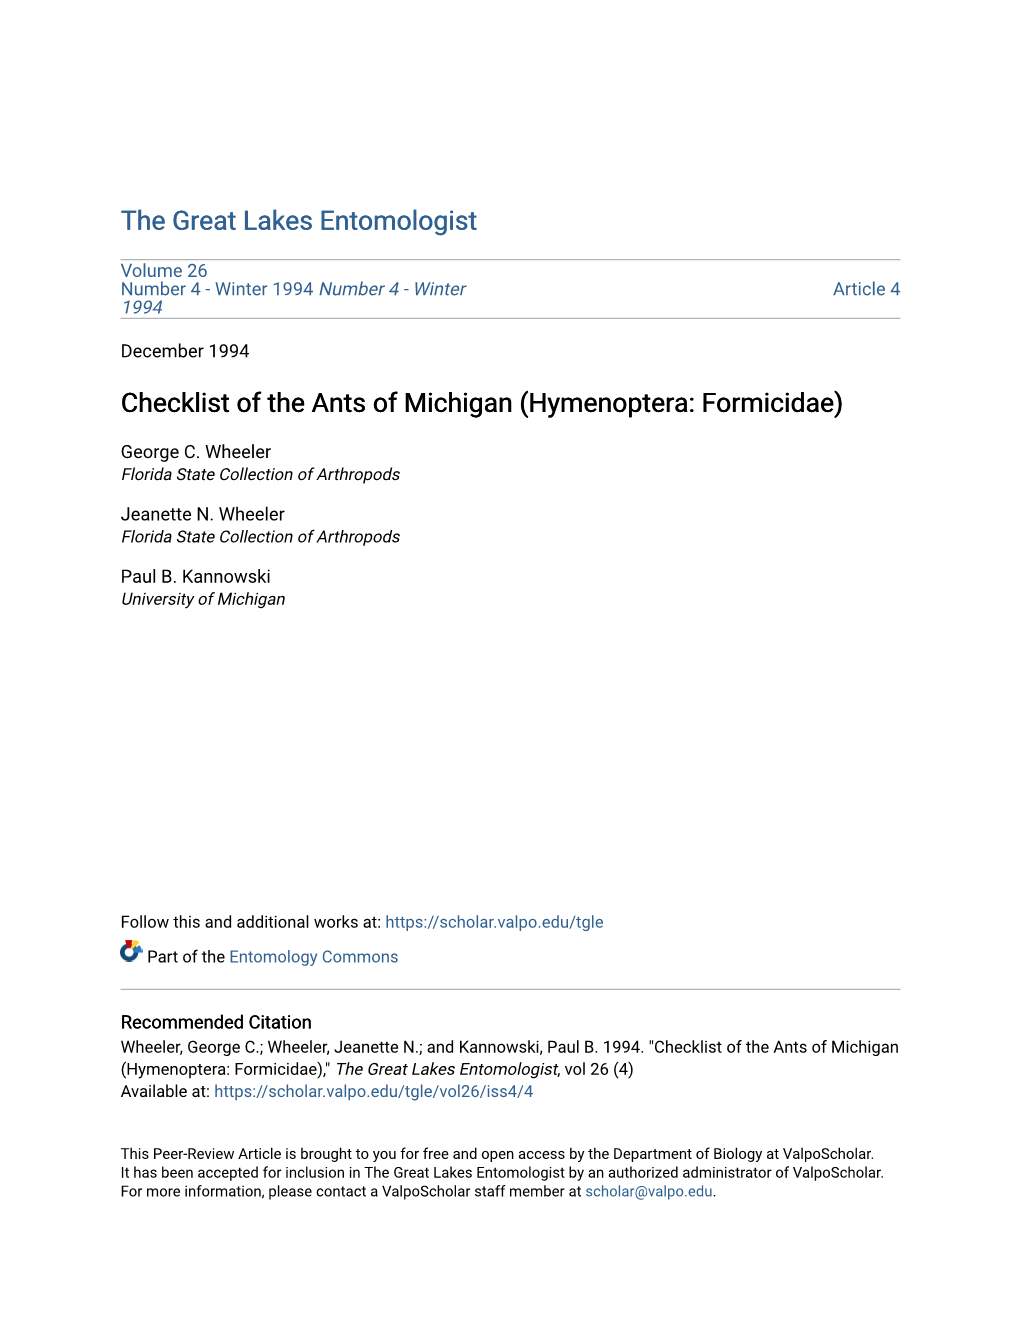 Checklist of the Ants of Michigan (Hymenoptera: Formicidae)